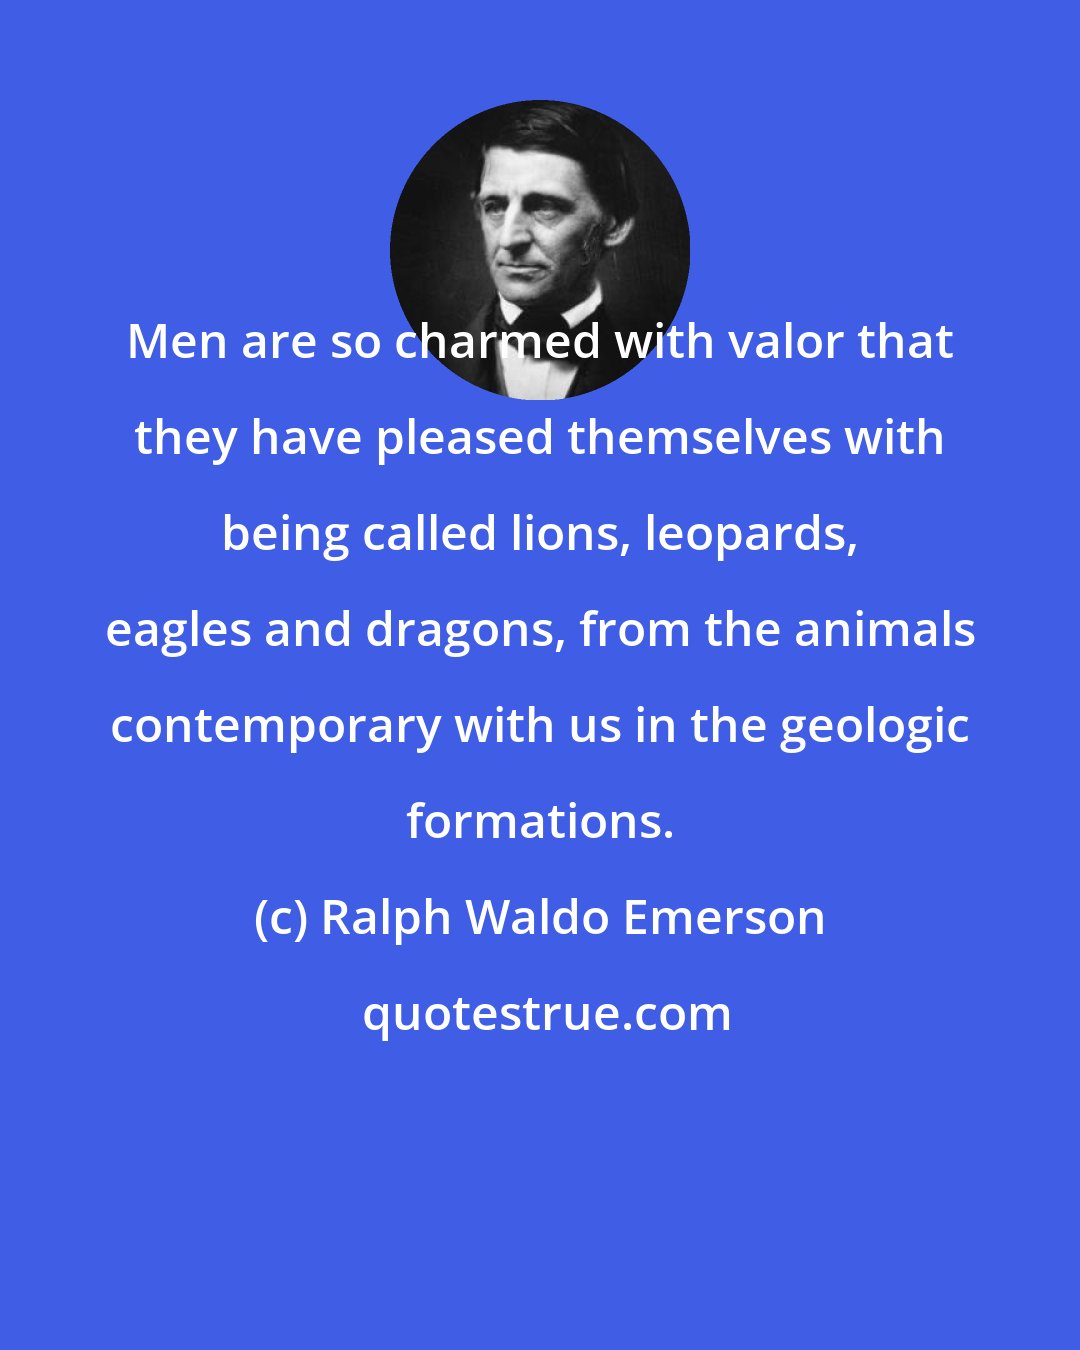 Ralph Waldo Emerson: Men are so charmed with valor that they have pleased themselves with being called lions, leopards, eagles and dragons, from the animals contemporary with us in the geologic formations.